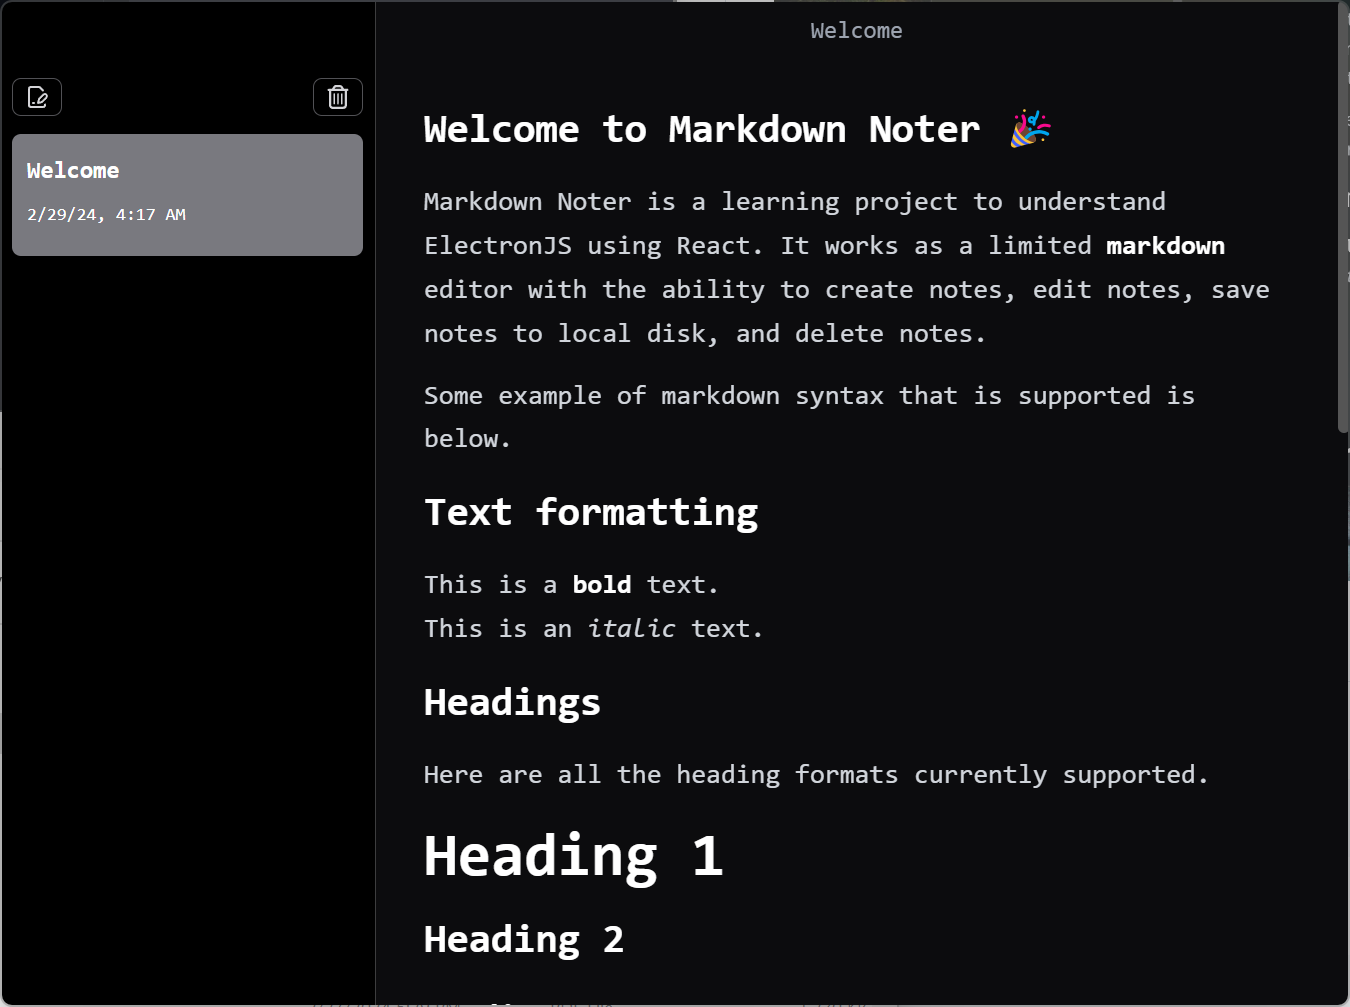 Markdown-Noter Welcome Note Screenshot